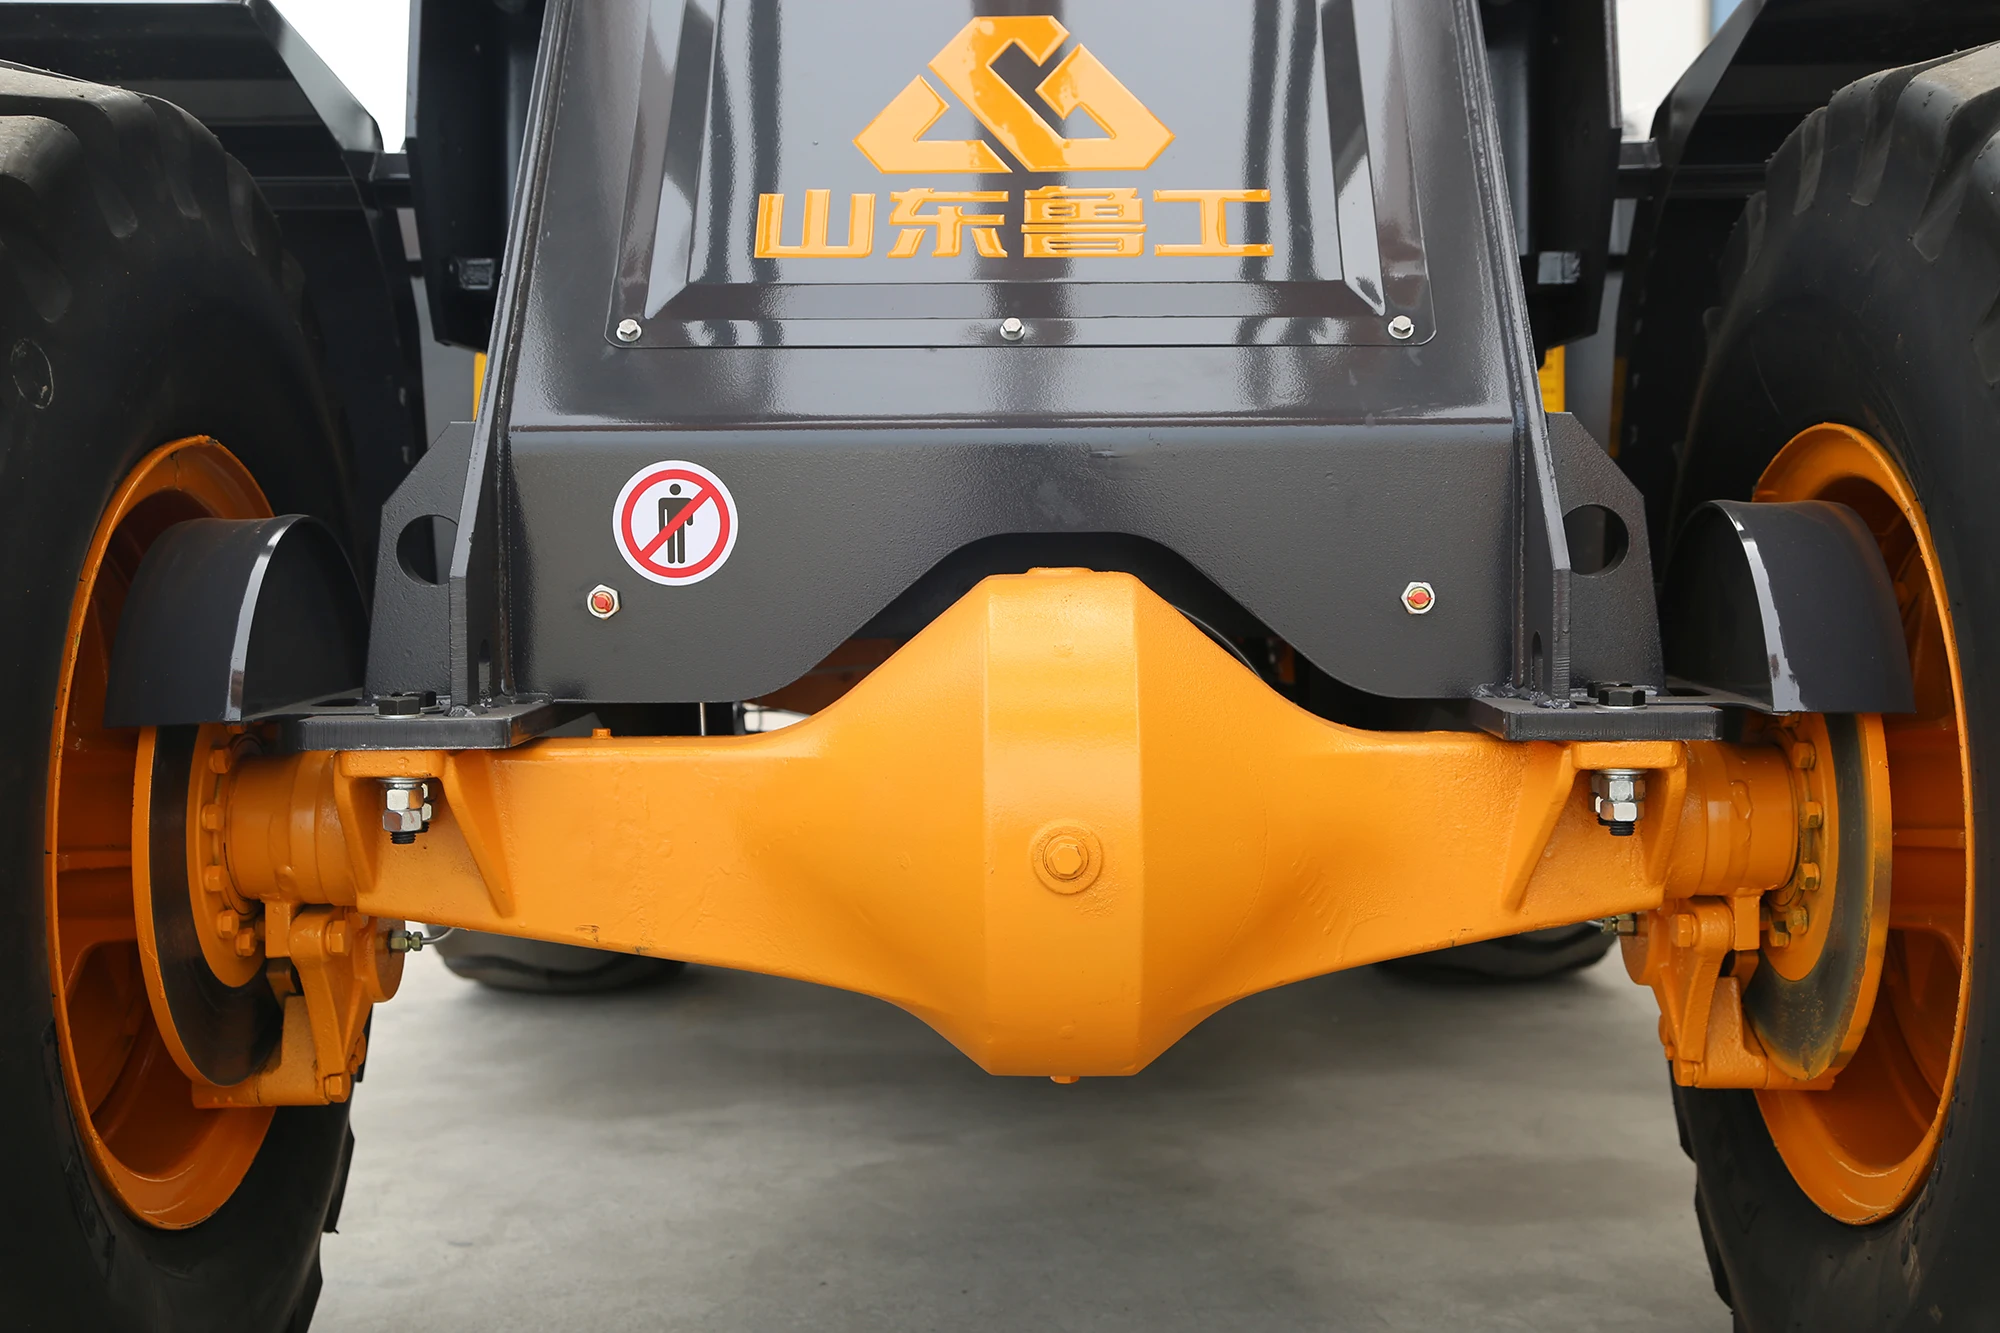 LuGong LG930 Ce Approved 1.8ton Mini Compact Wheel Loader for Weichai Engine